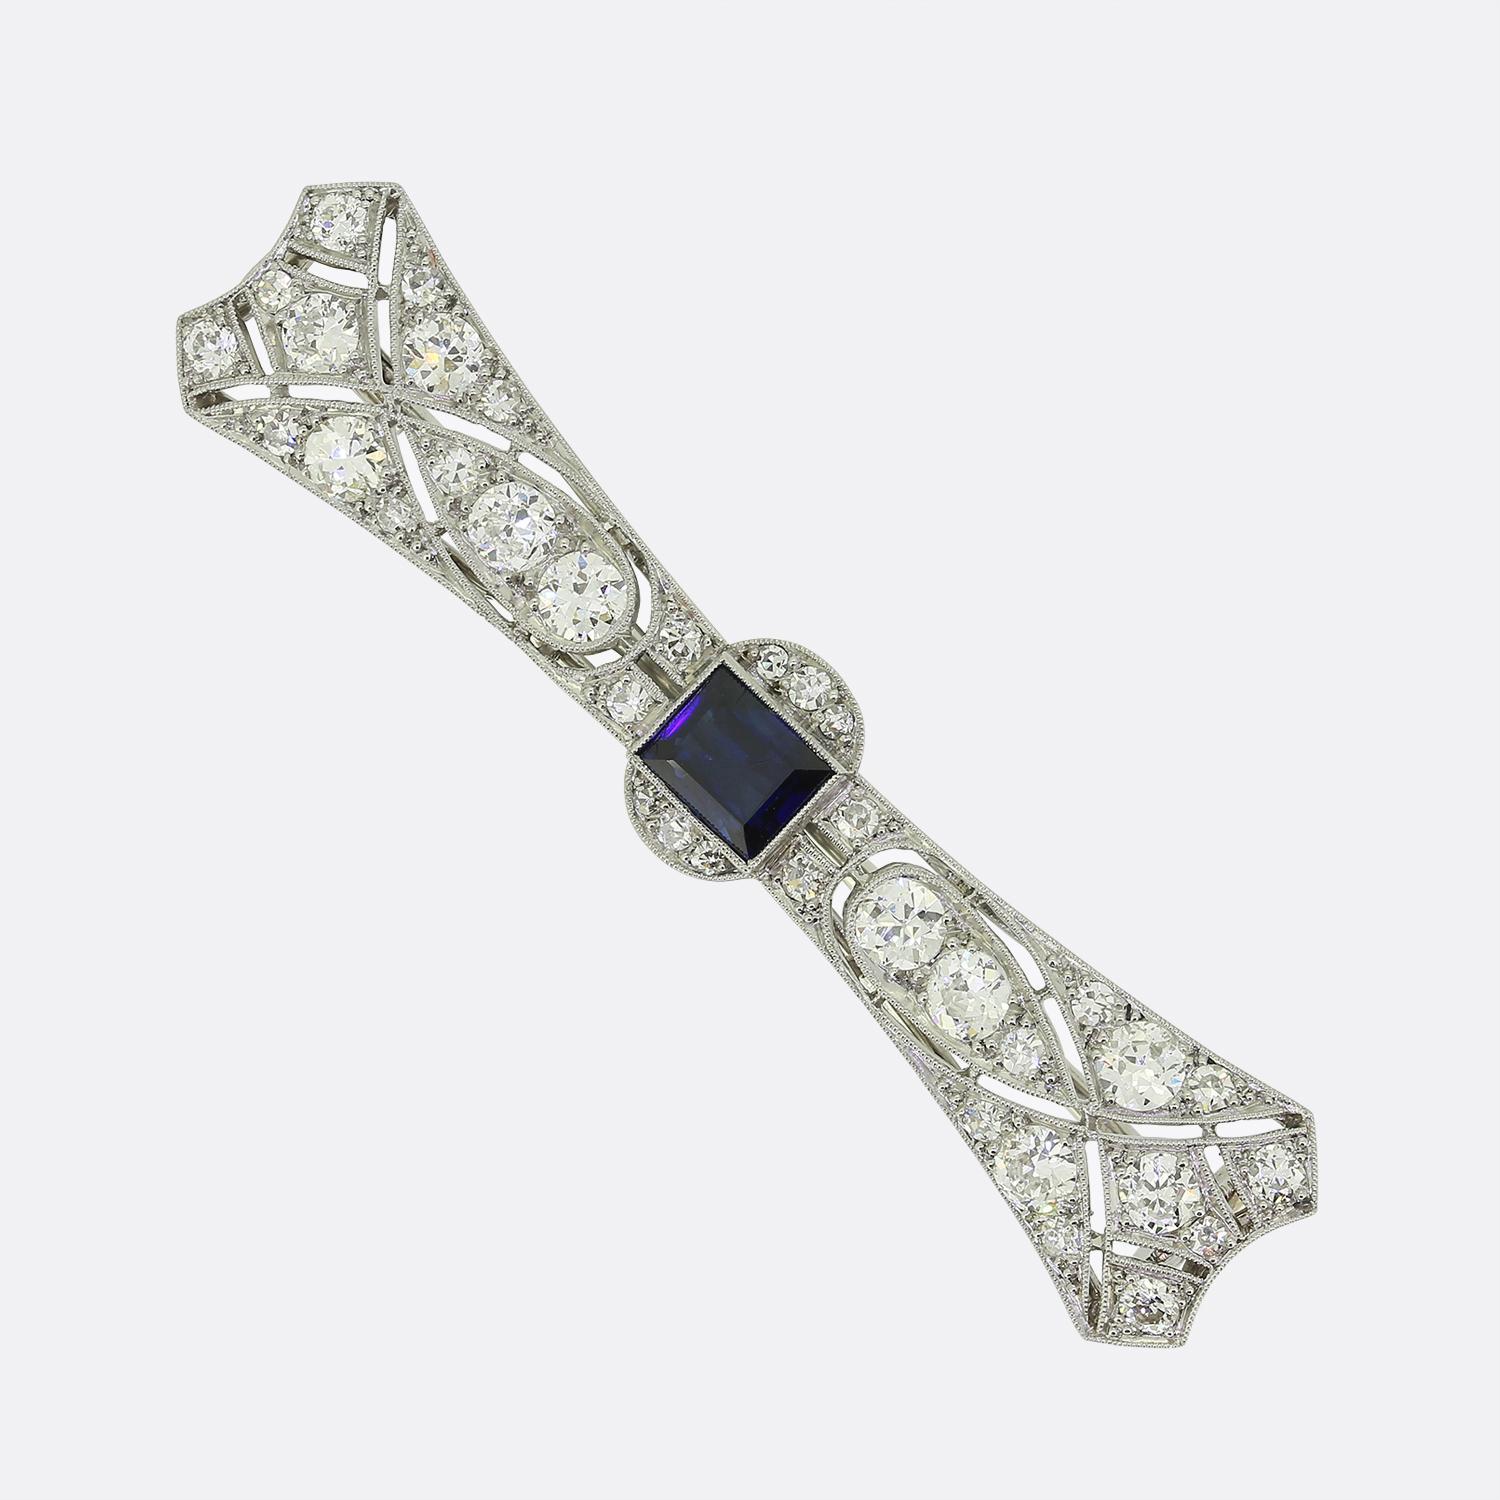 This is an Art Deco sapphire and diamond brooch from the luxury French jewellery designer LaCloche Frères. The brooch is crafted in platinum and the central sapphire is a mid to dark blue hue. The darker tone of the sapphire emphasises the bright